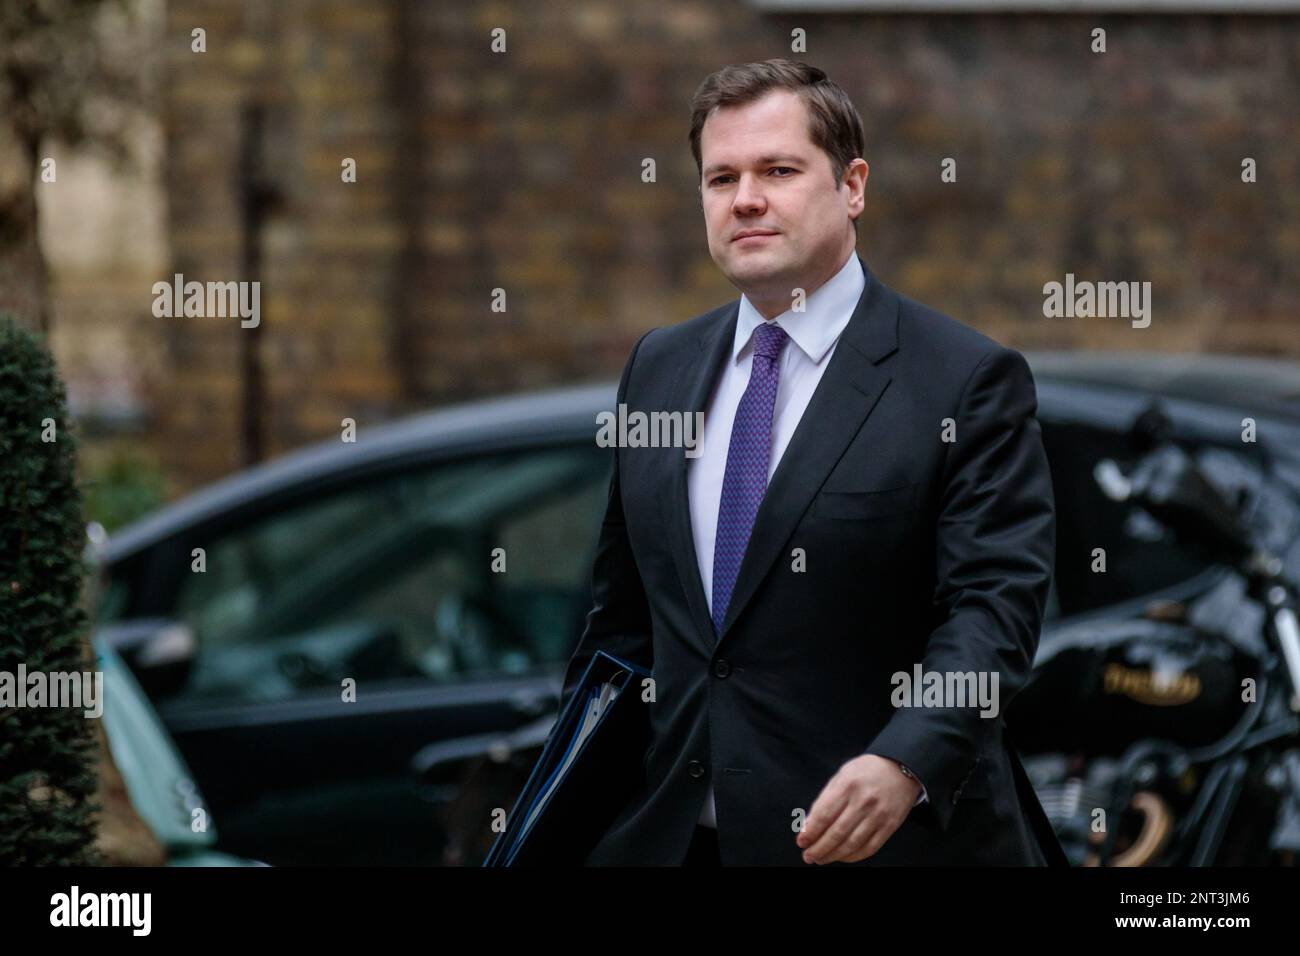 Downing Street, London, UK. 27th February 2023.  Robert Jenrick MP, Minister of State (Minister for Immigration) in the Home Office, attends the emergency Cabinet Meeting at 10 Downing Street on the day Prime Minister Rishi Sunak and European Union president Ursula von der Leyen finalize the Northern Ireland Protocol in Windsor. Photo by Amanda Rose/Alamy Live News Stock Photo